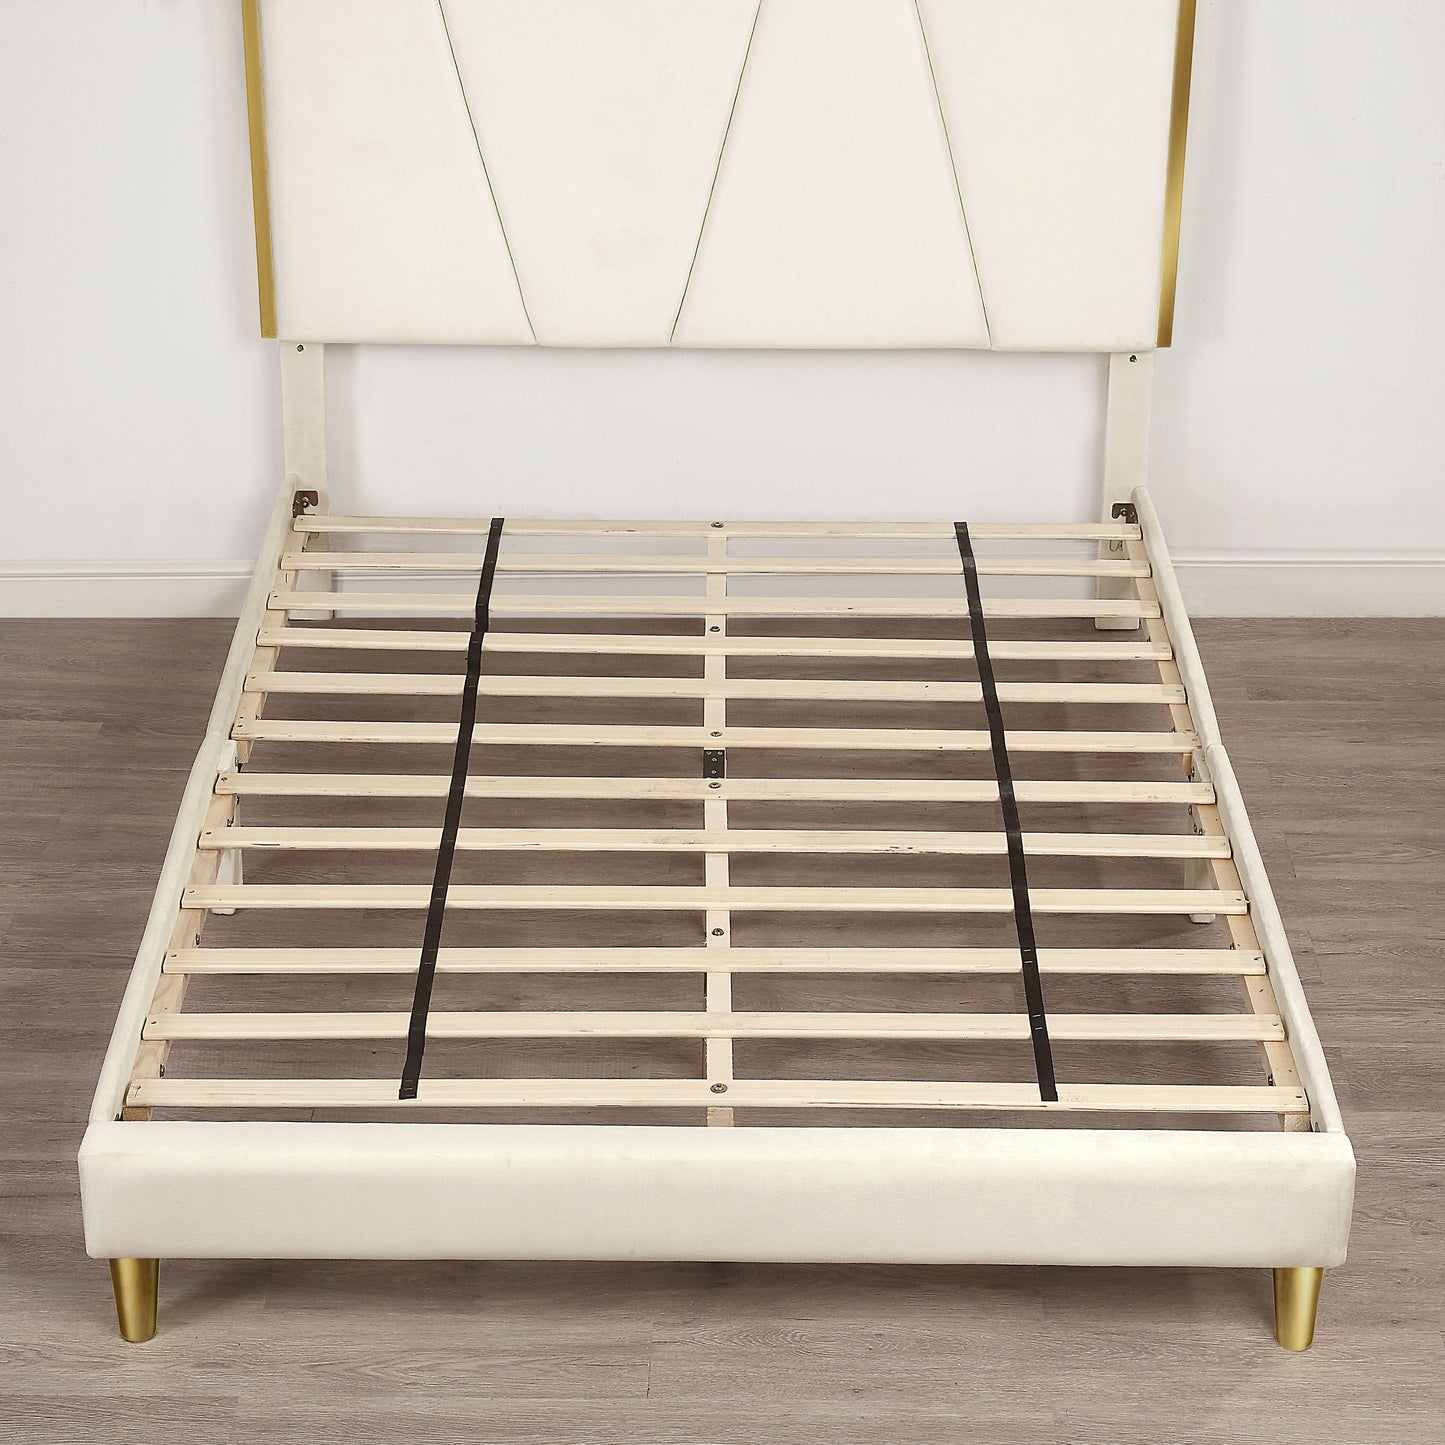 Front-facing contemporary beige and gold upholstered queen bed with slats shown in an empty room with wood floors